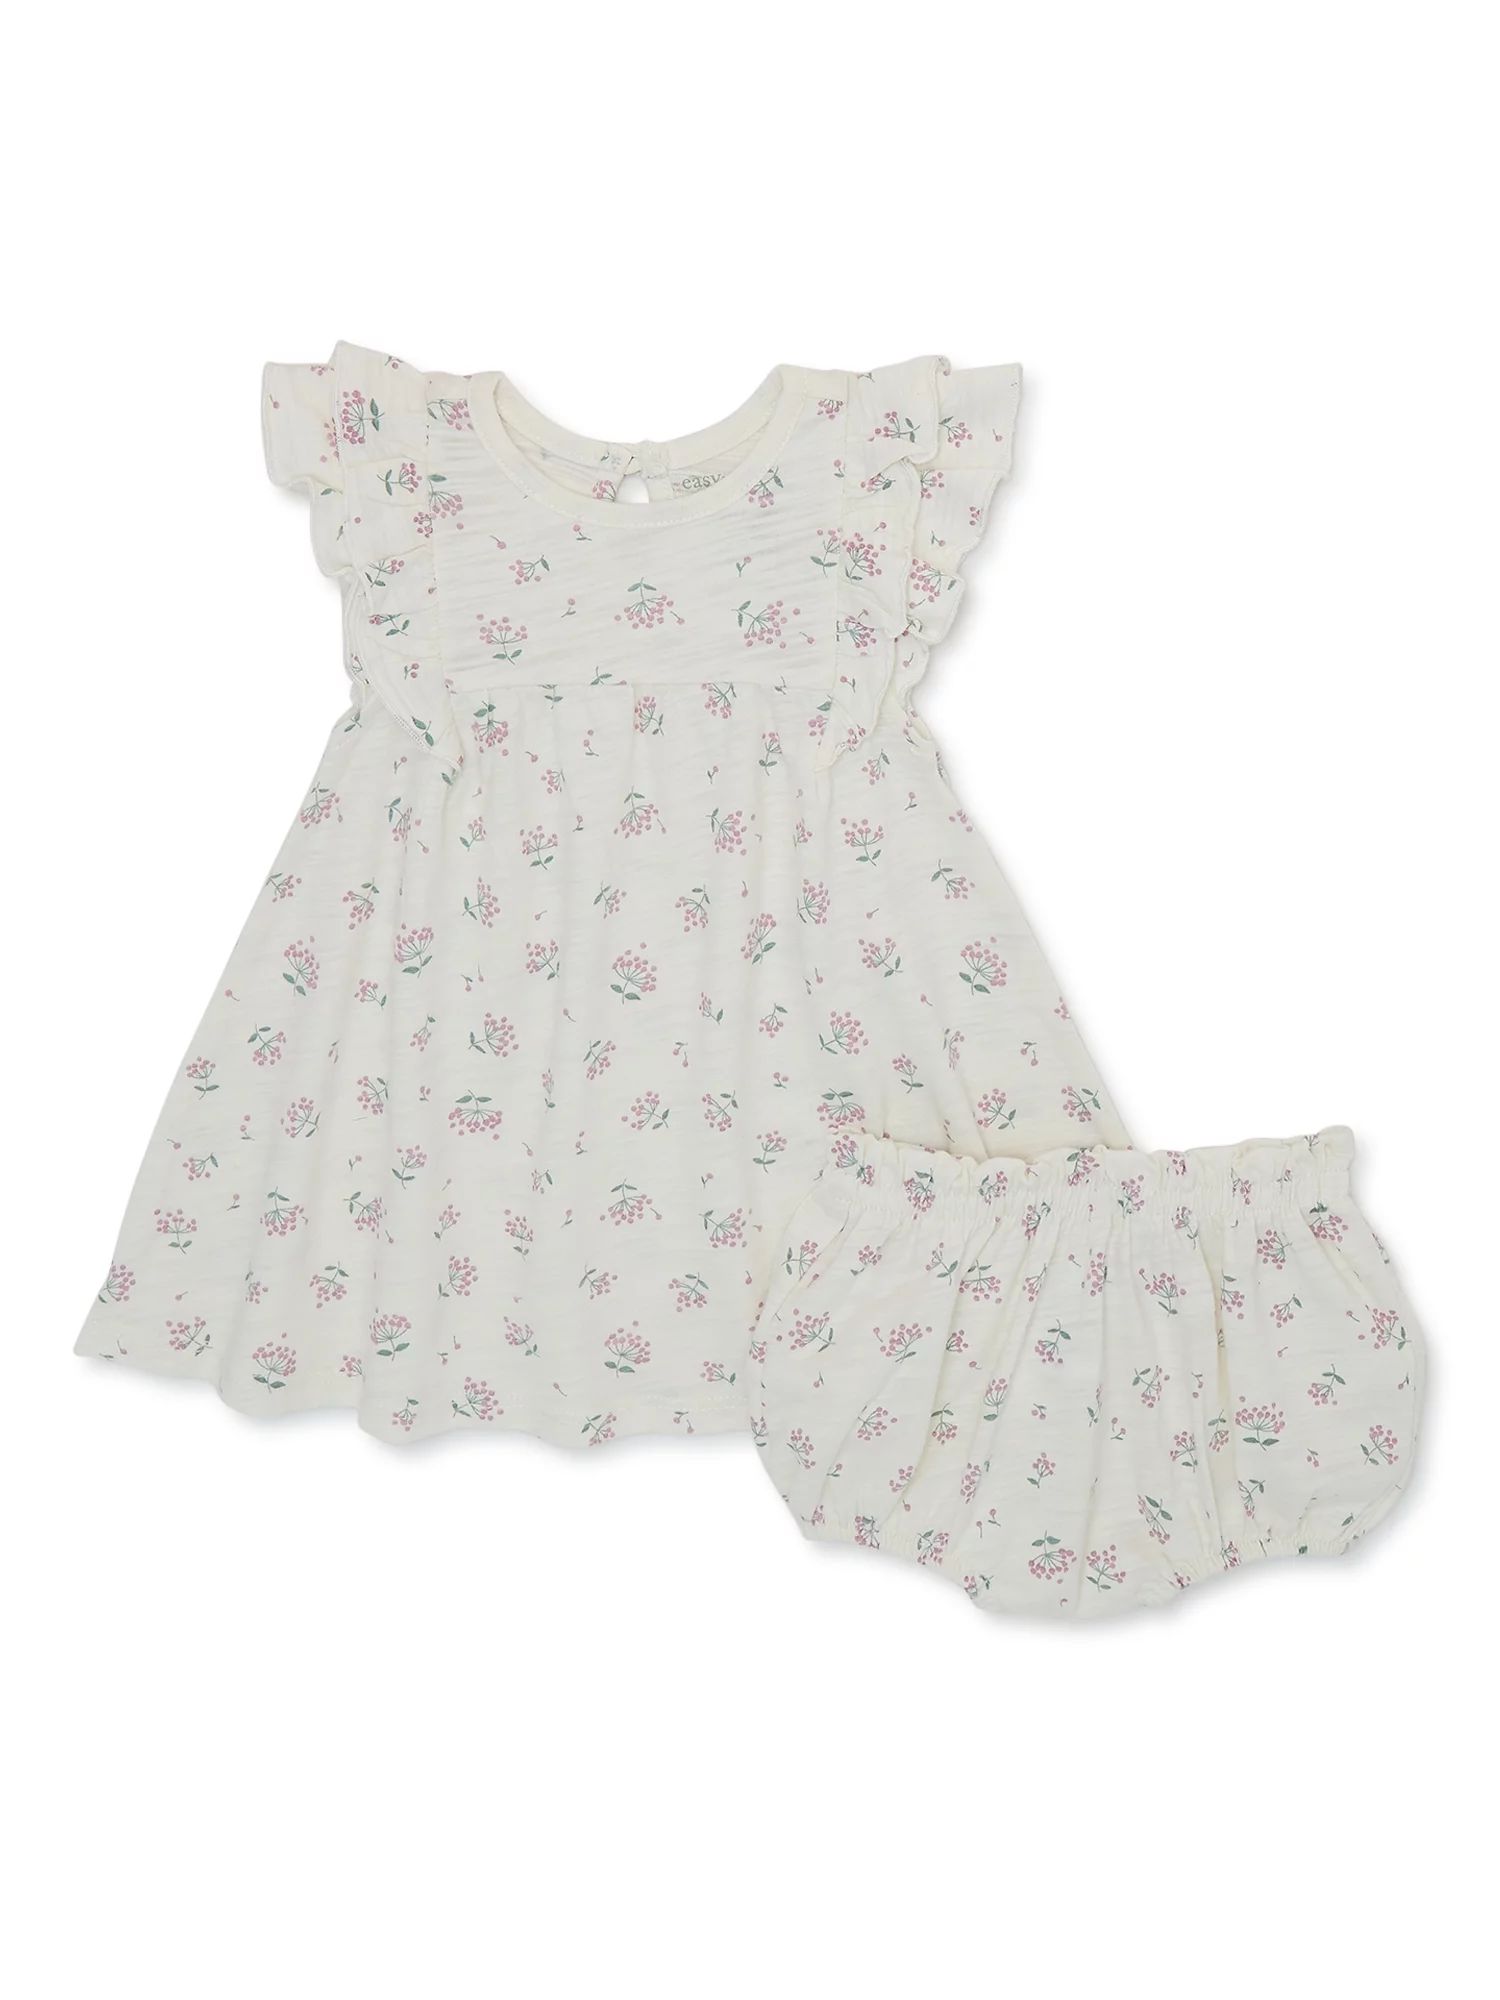 easy-peasy Baby Girls Print Dress and Diaper Cover, Sizes 0-24 Months | Walmart (US)